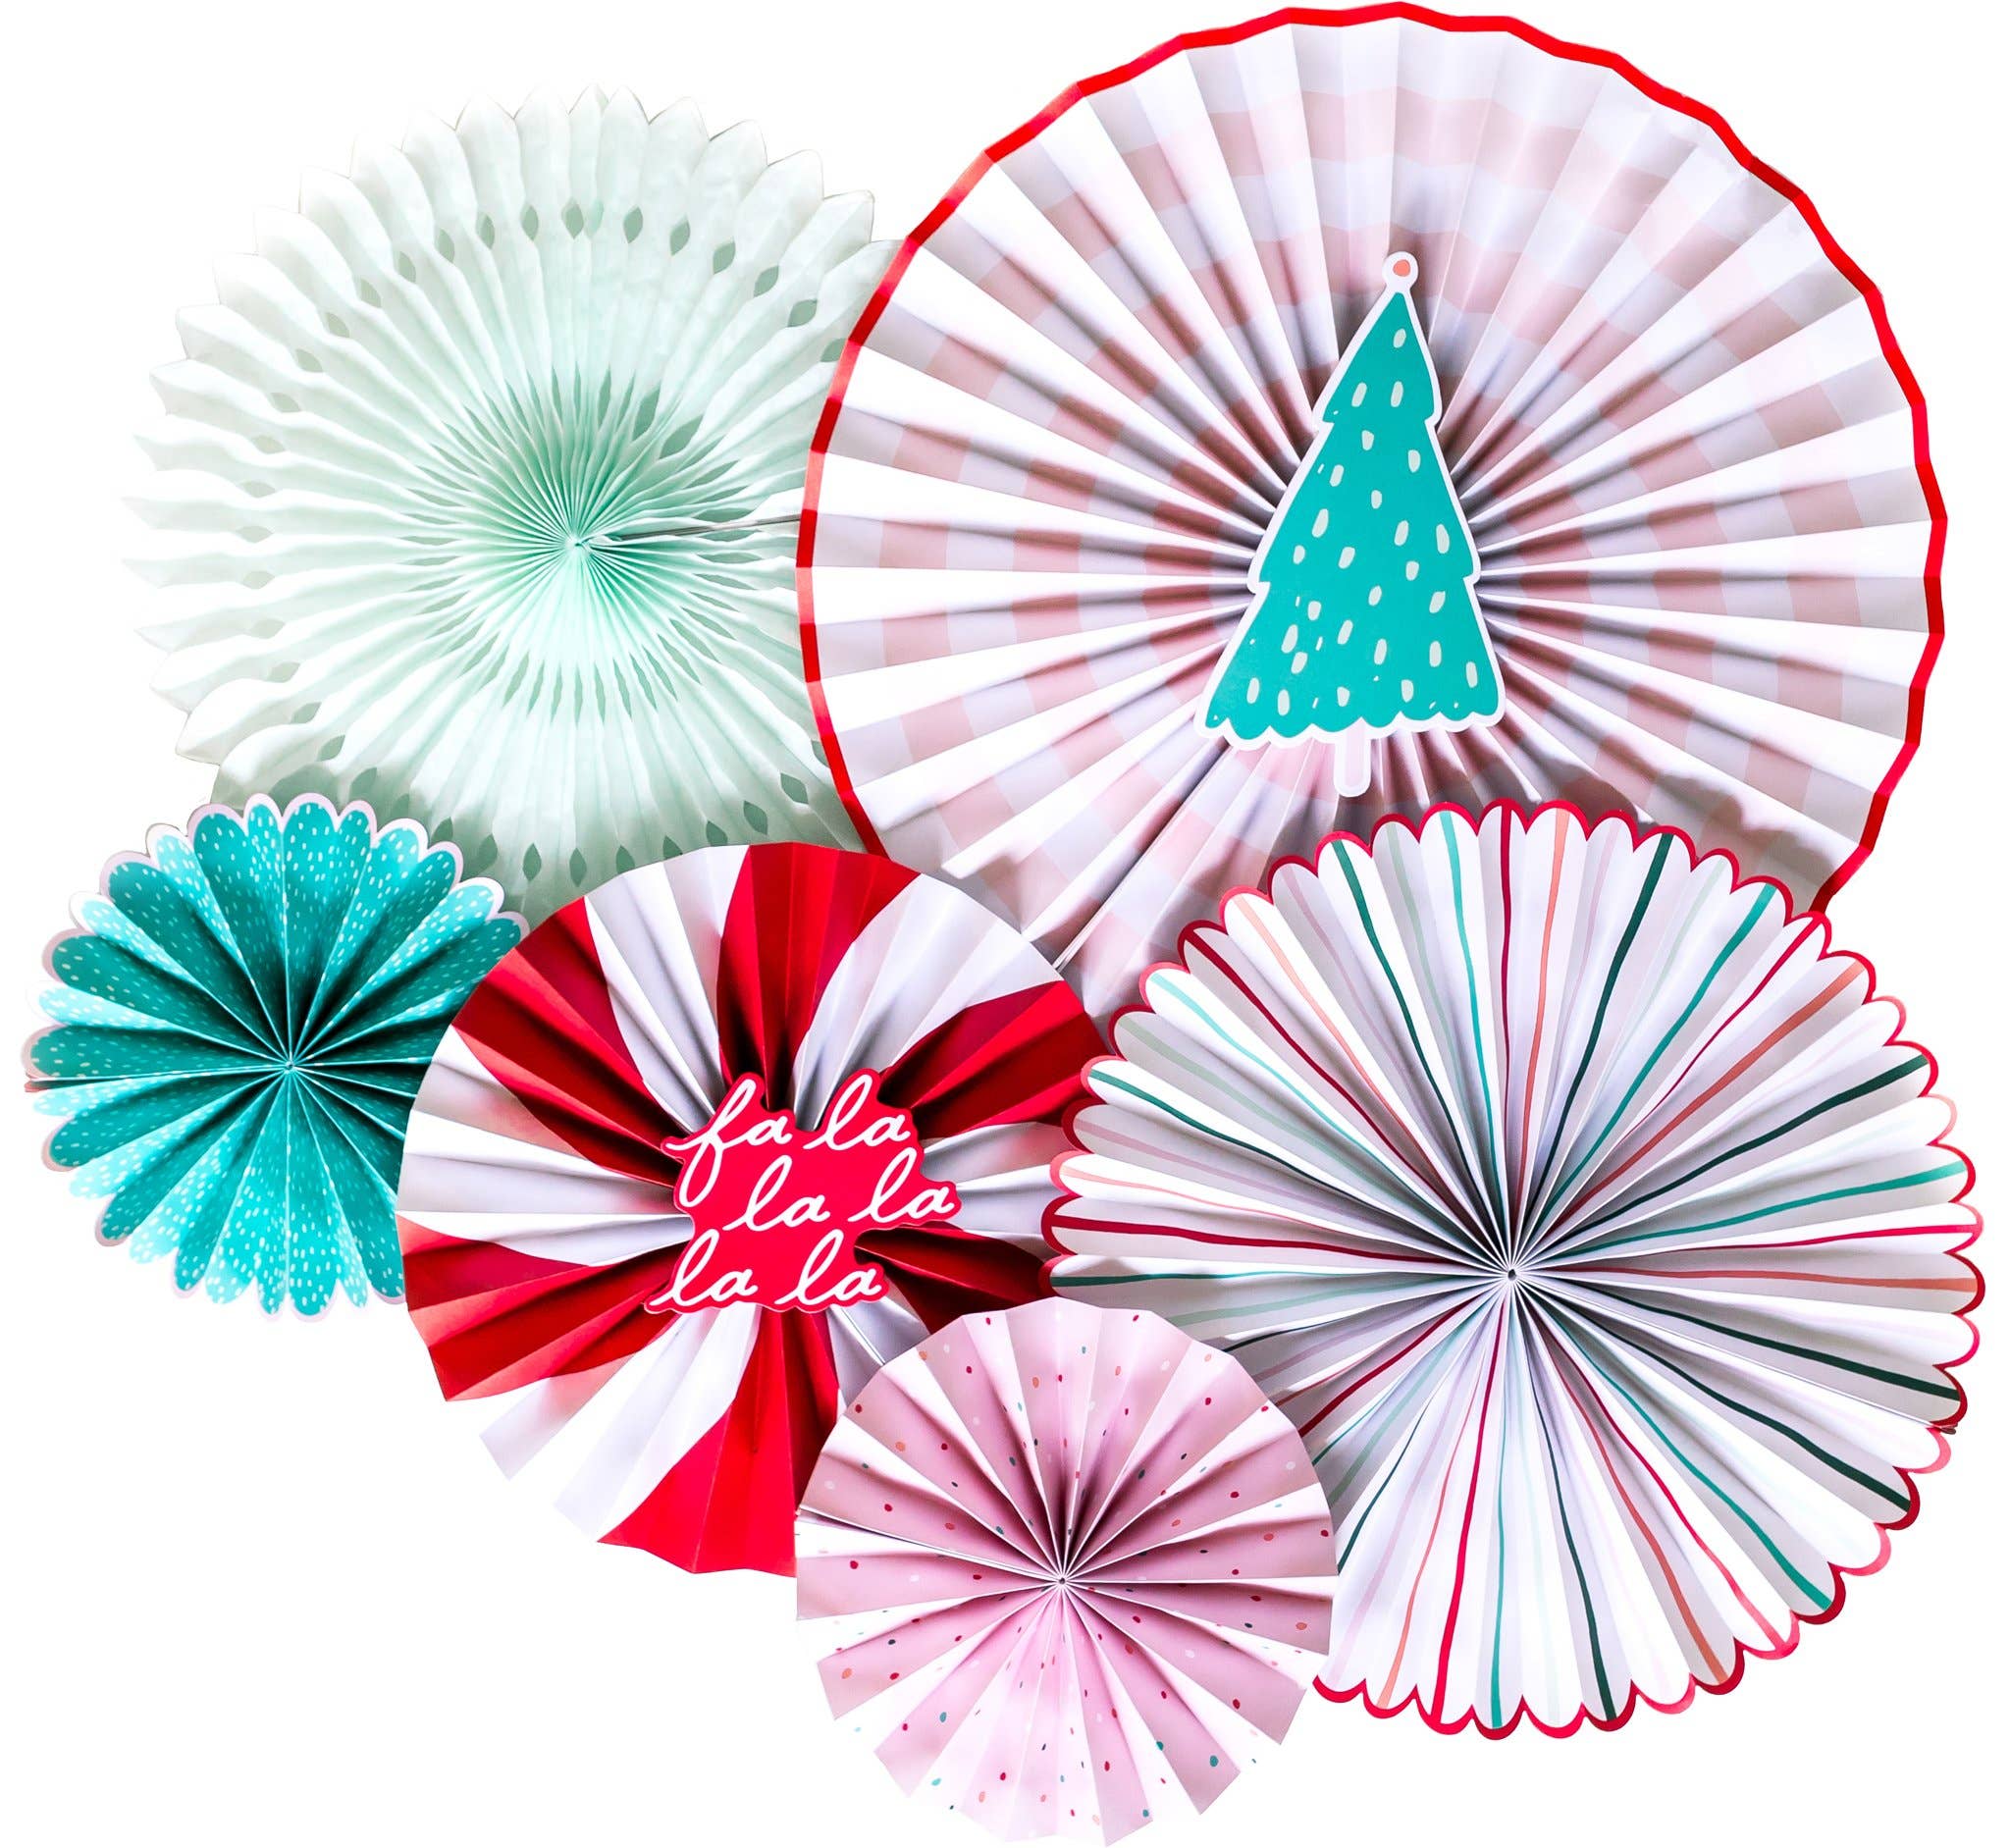 Oui Party Christmas Party Fa La La Fans by My Mind’s Eye. Decorative christmas fans. Christmas decor. Holiday party decor. Fa la la la decorations. Red and White decorations